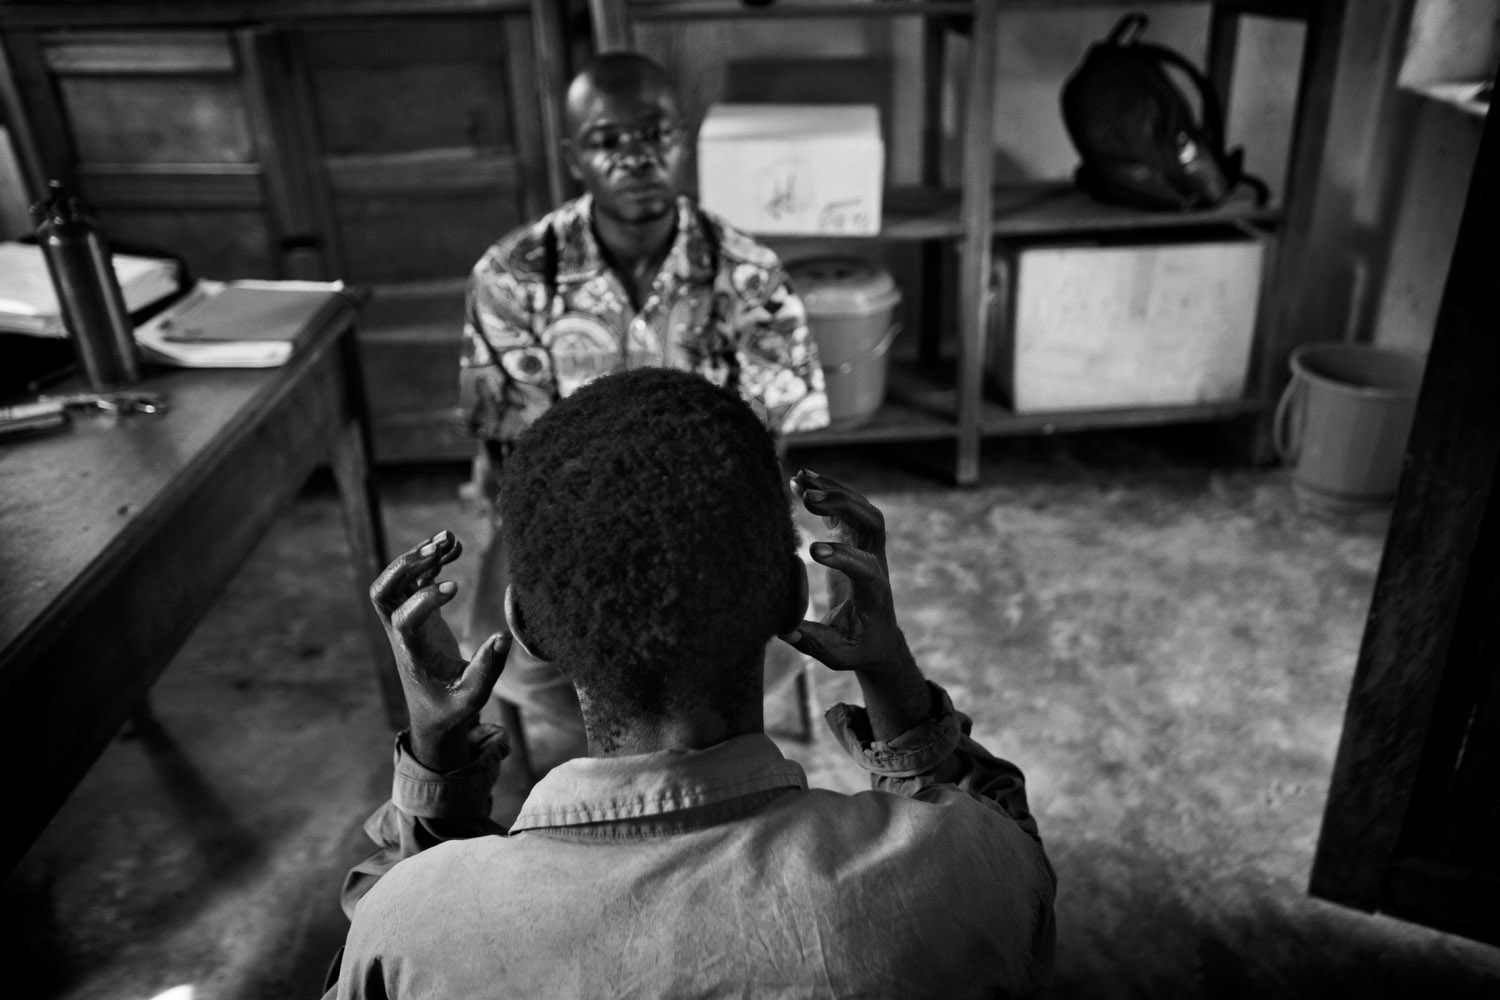 Mineyro Jean-Marie describes to Médécines Sans Frontières Psychologist Serge Nzuya Mbwibwi how he felt when The Lord’s Resistance Army attacked his family and attempted to kidnap his daughter. Niangara, Democratic Republic of Congo. June 2011. Photo Robin Hammond/Panos